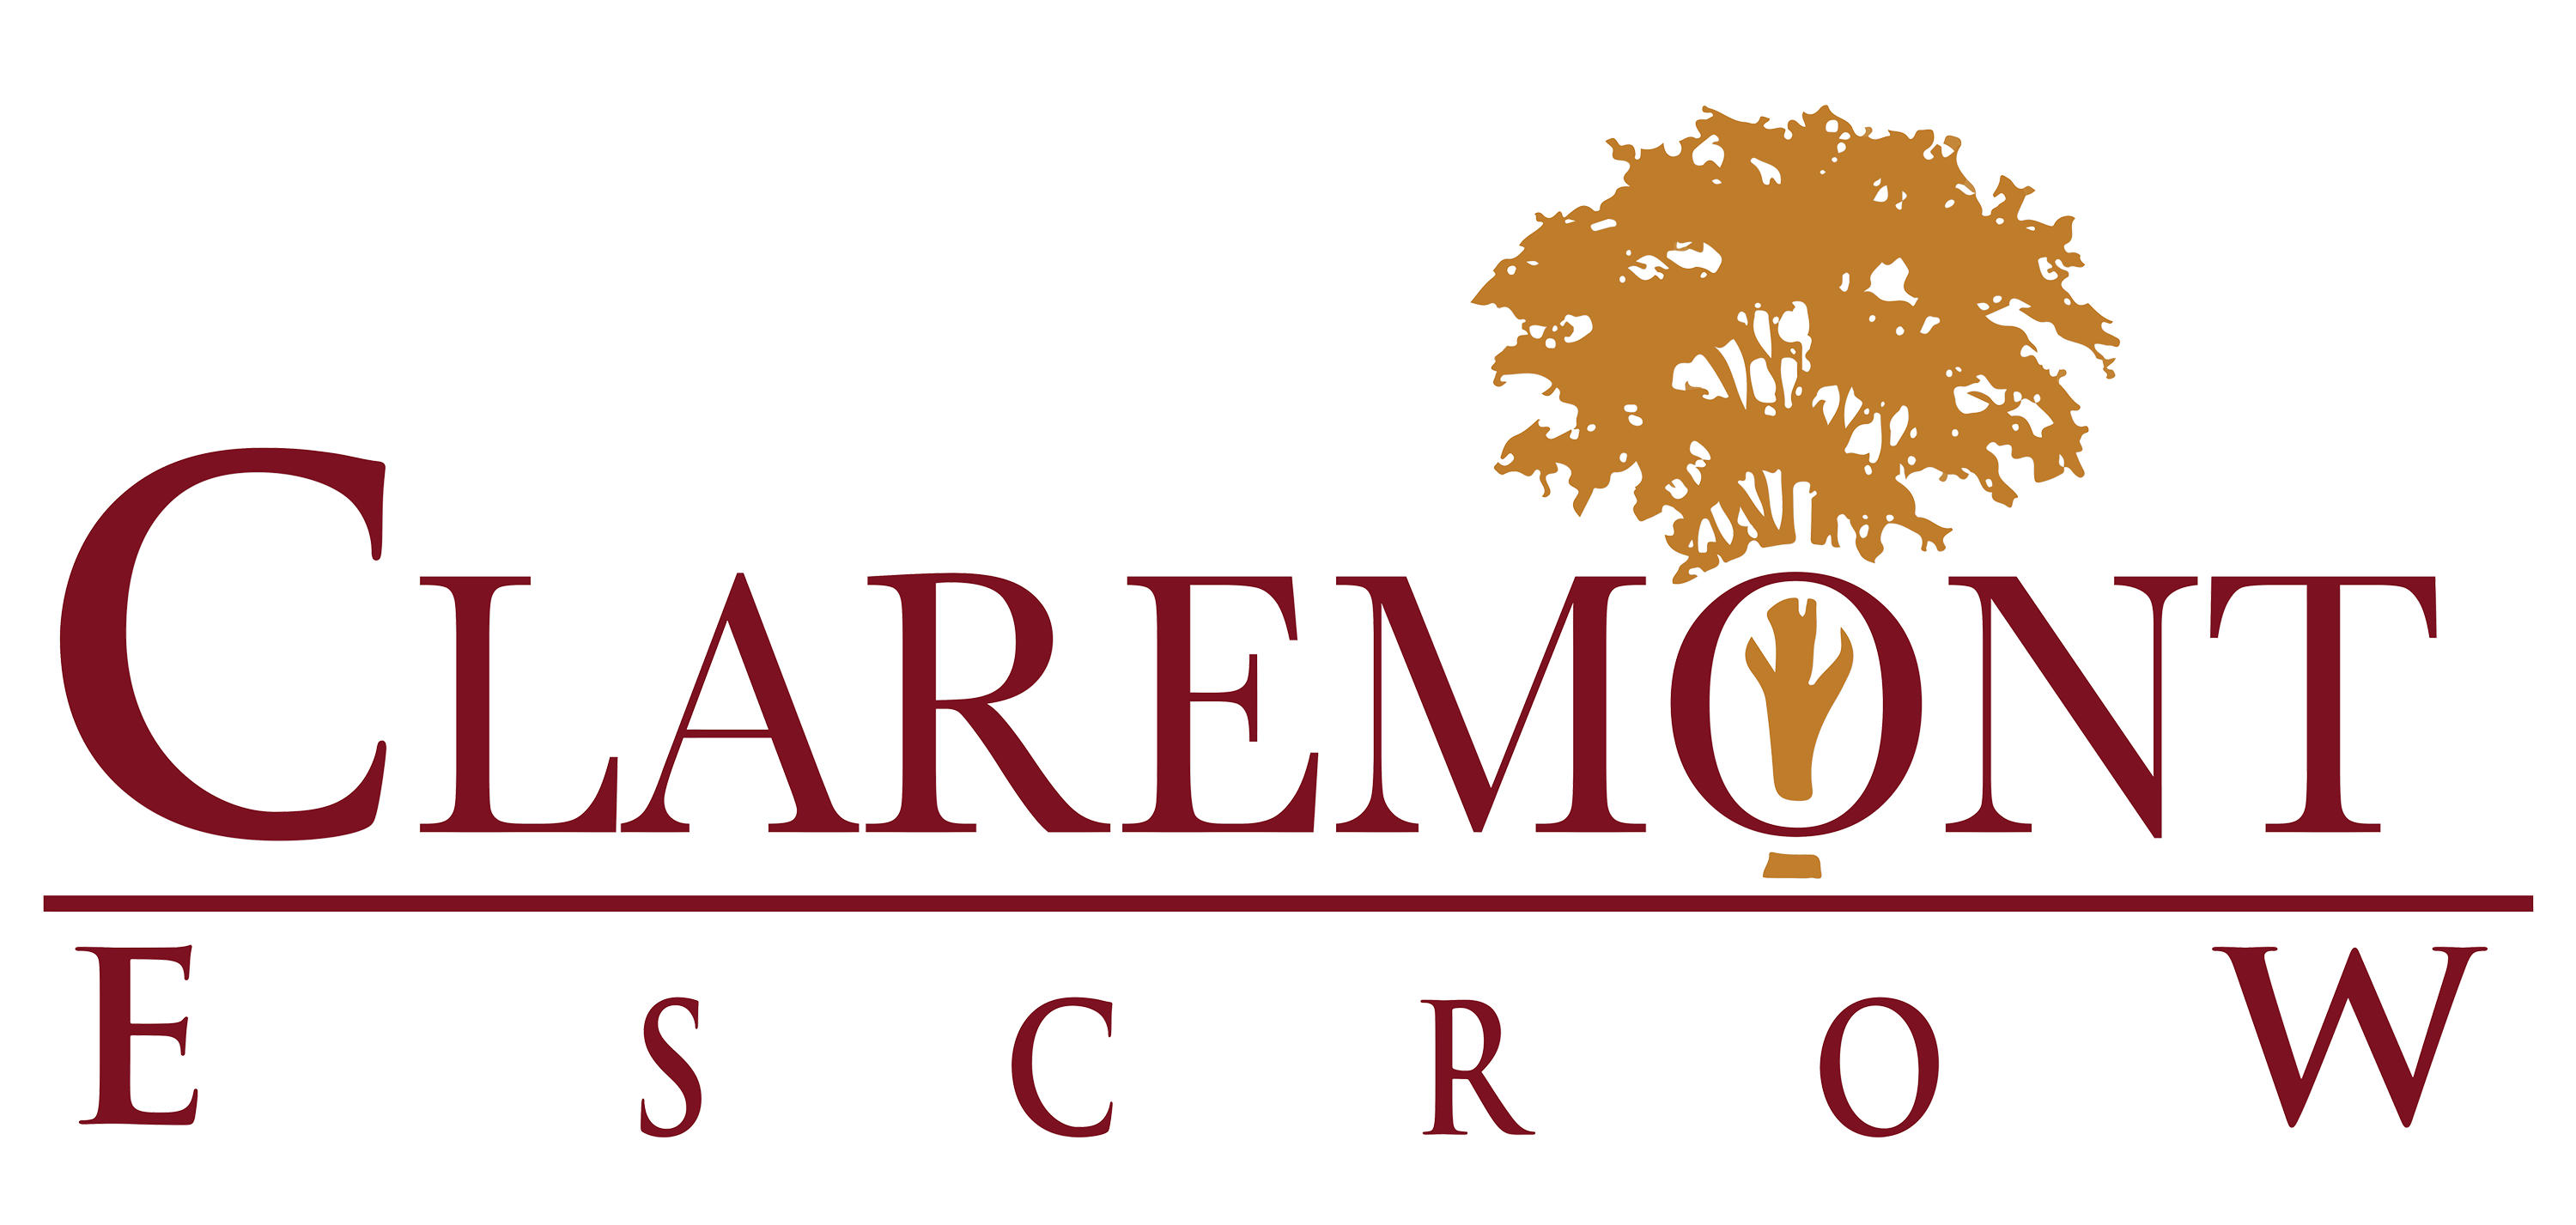 Claremont Logo - Claremont Escrow – The Choice of Top Producers